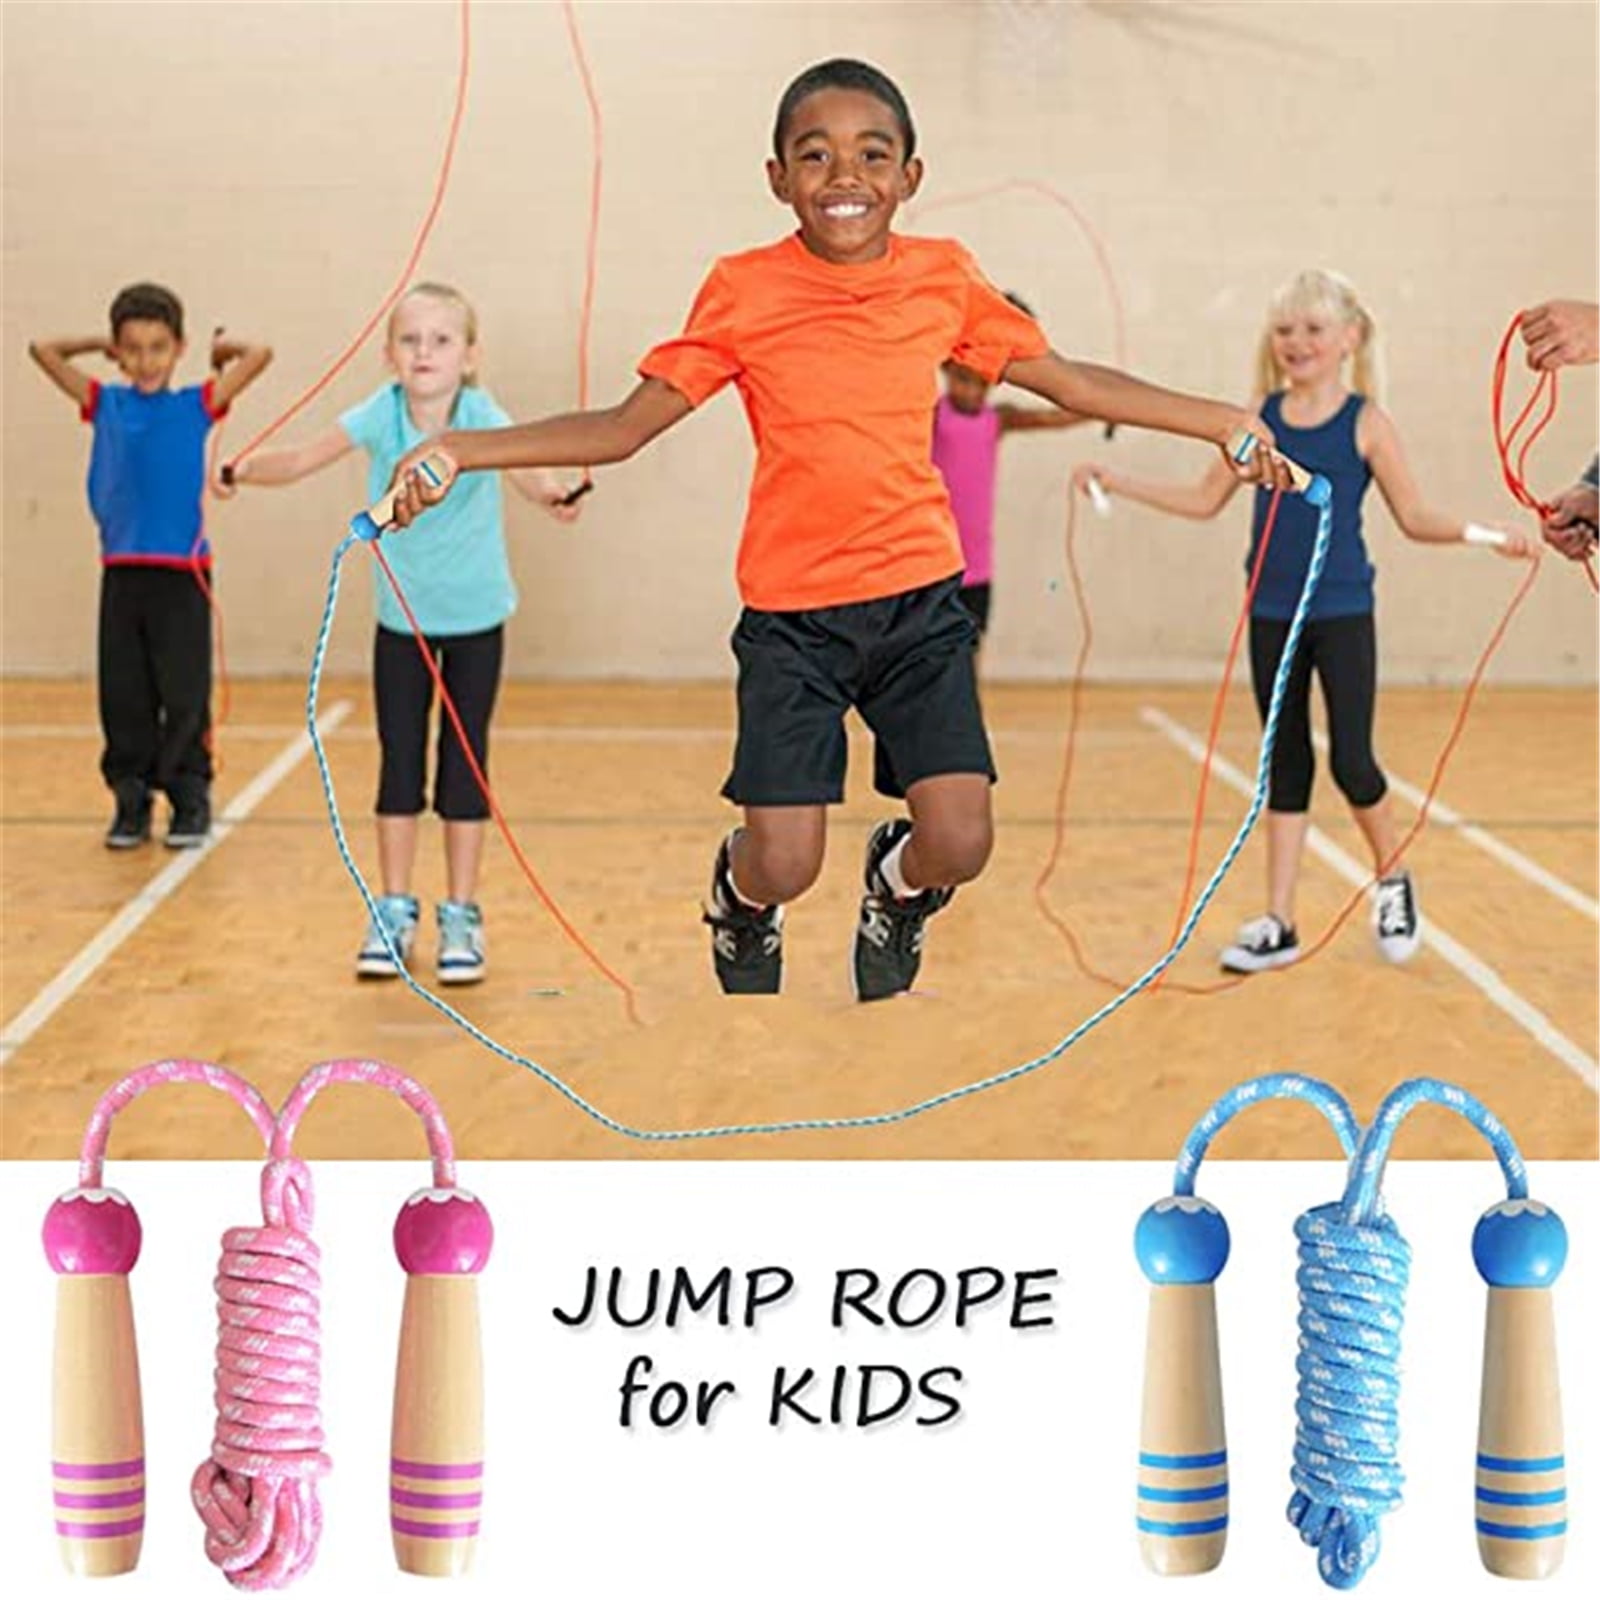 Kids Wooden Animal Skipping Rope Children Exercise Jumping Game Fitness Gym 